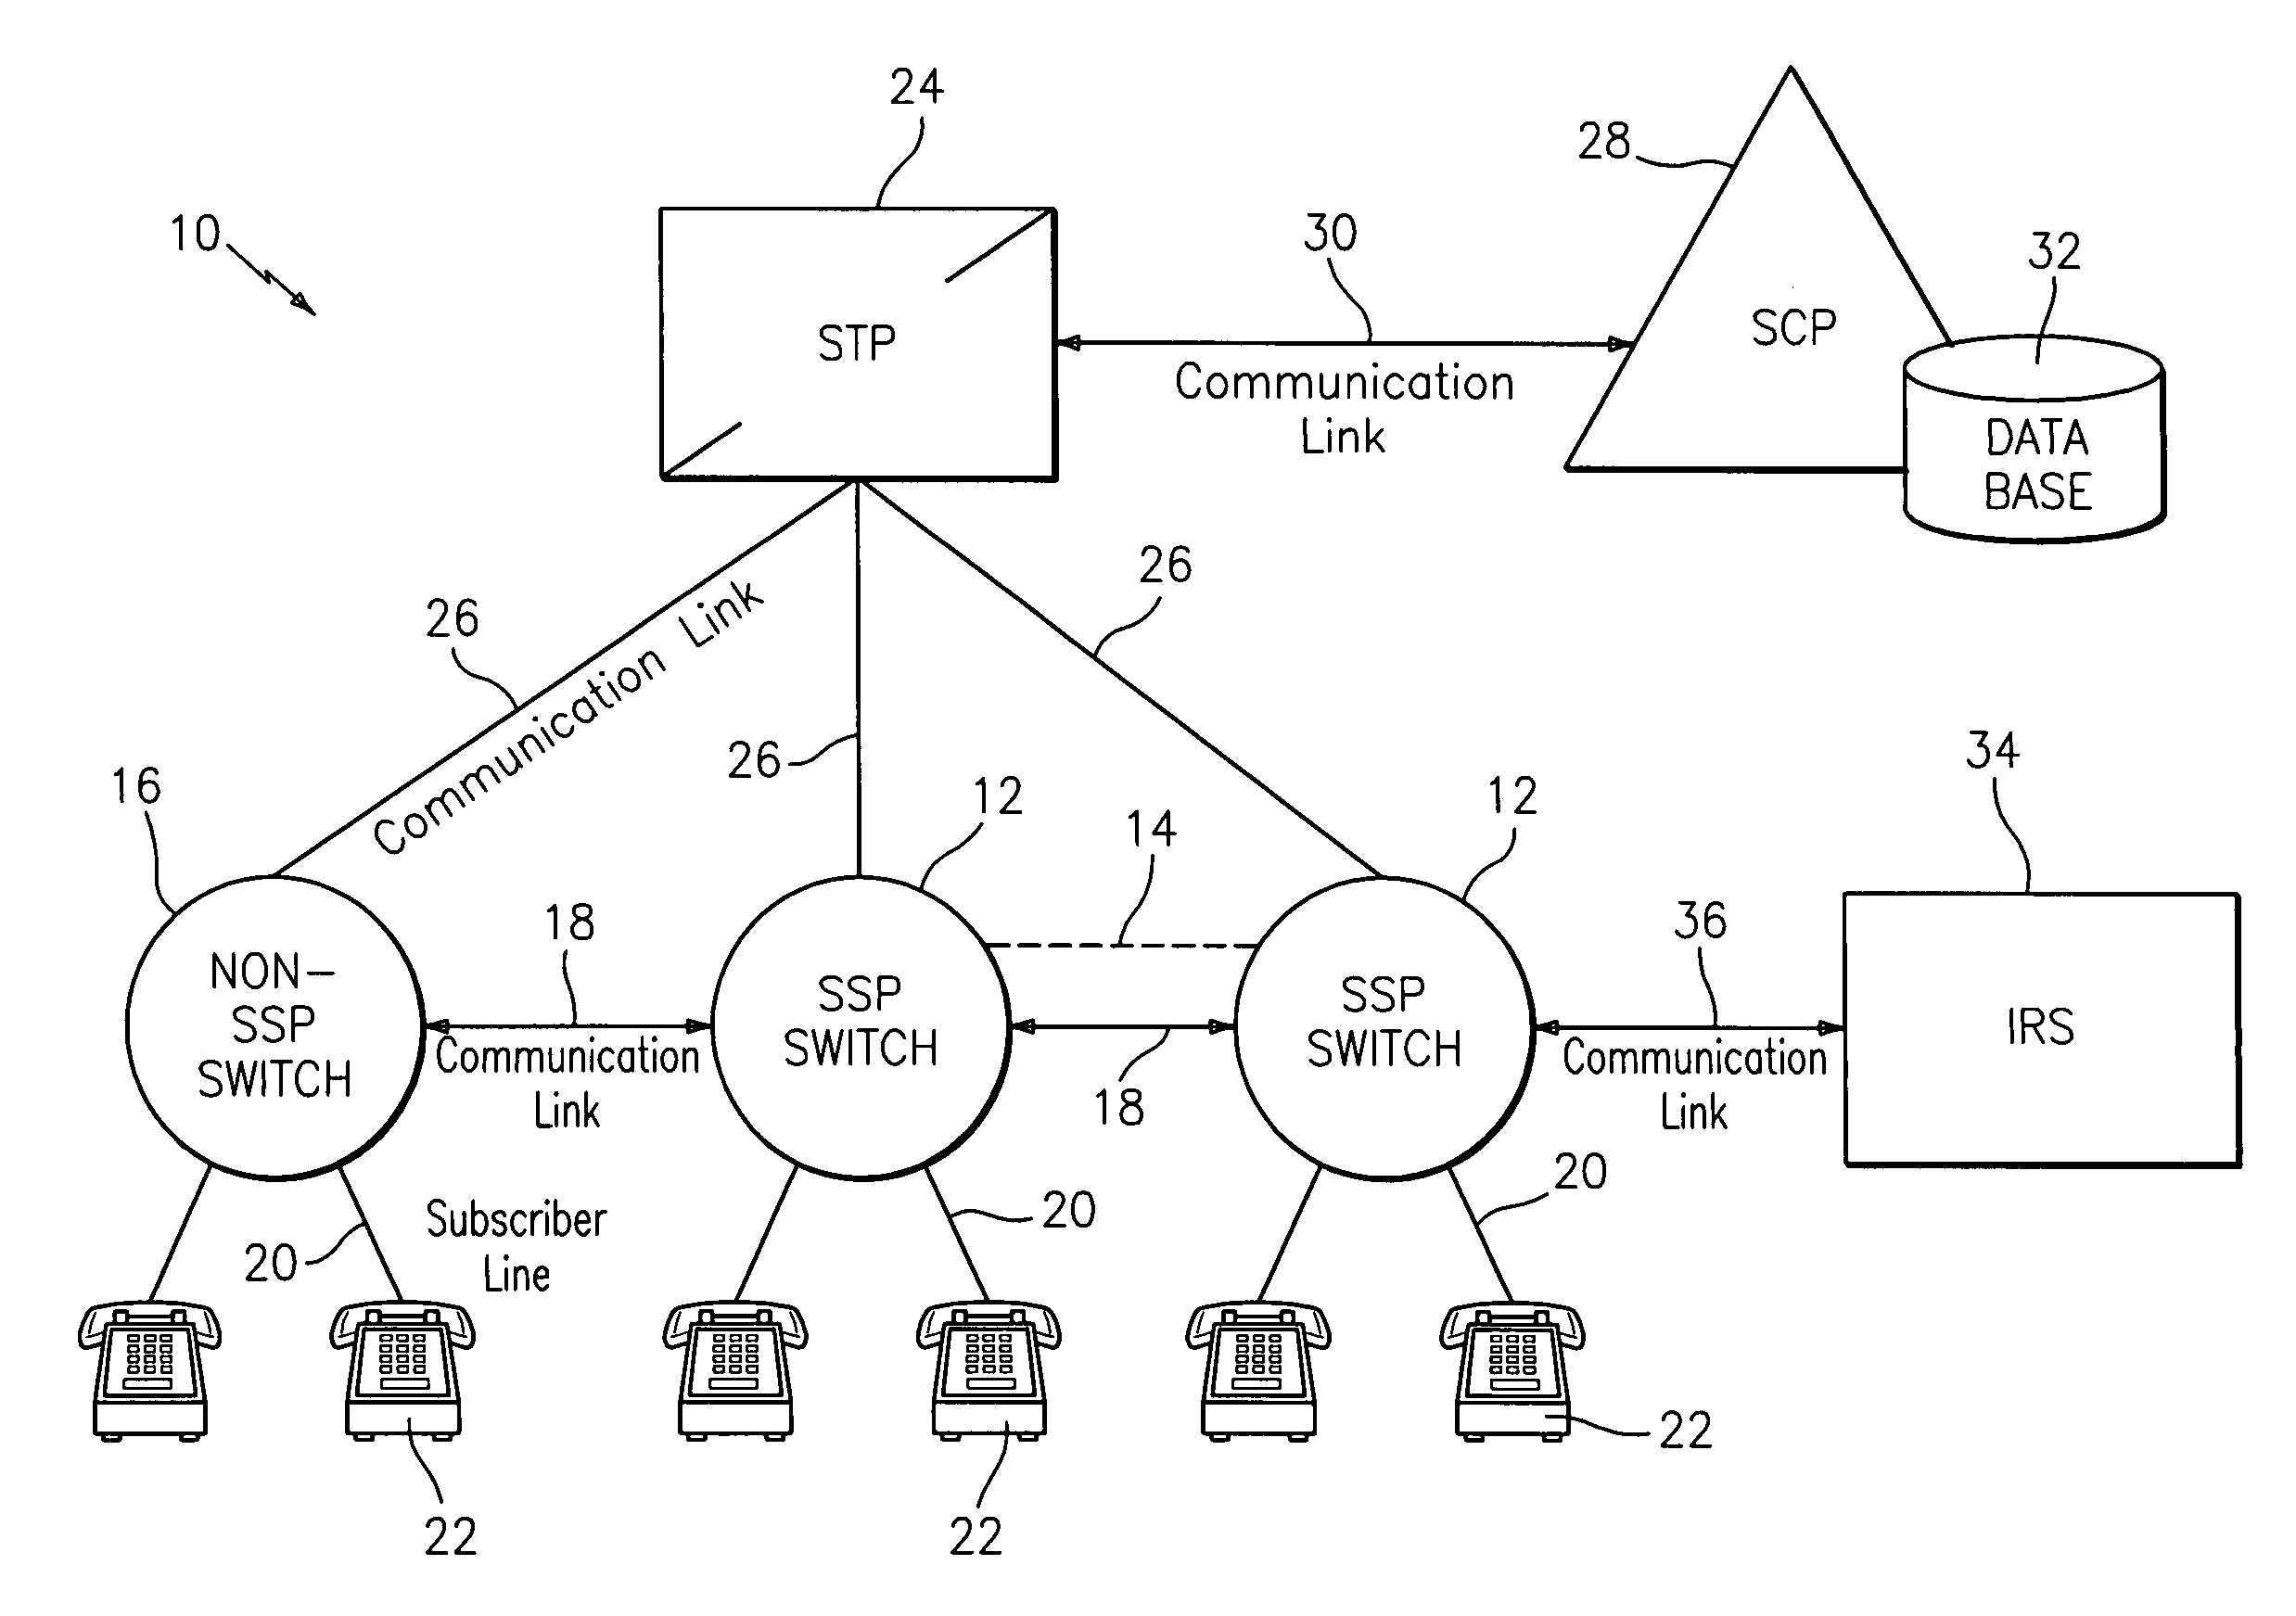 Network and method for providing a flexible call forwarding telecommunications service with automatic speech recognition capability